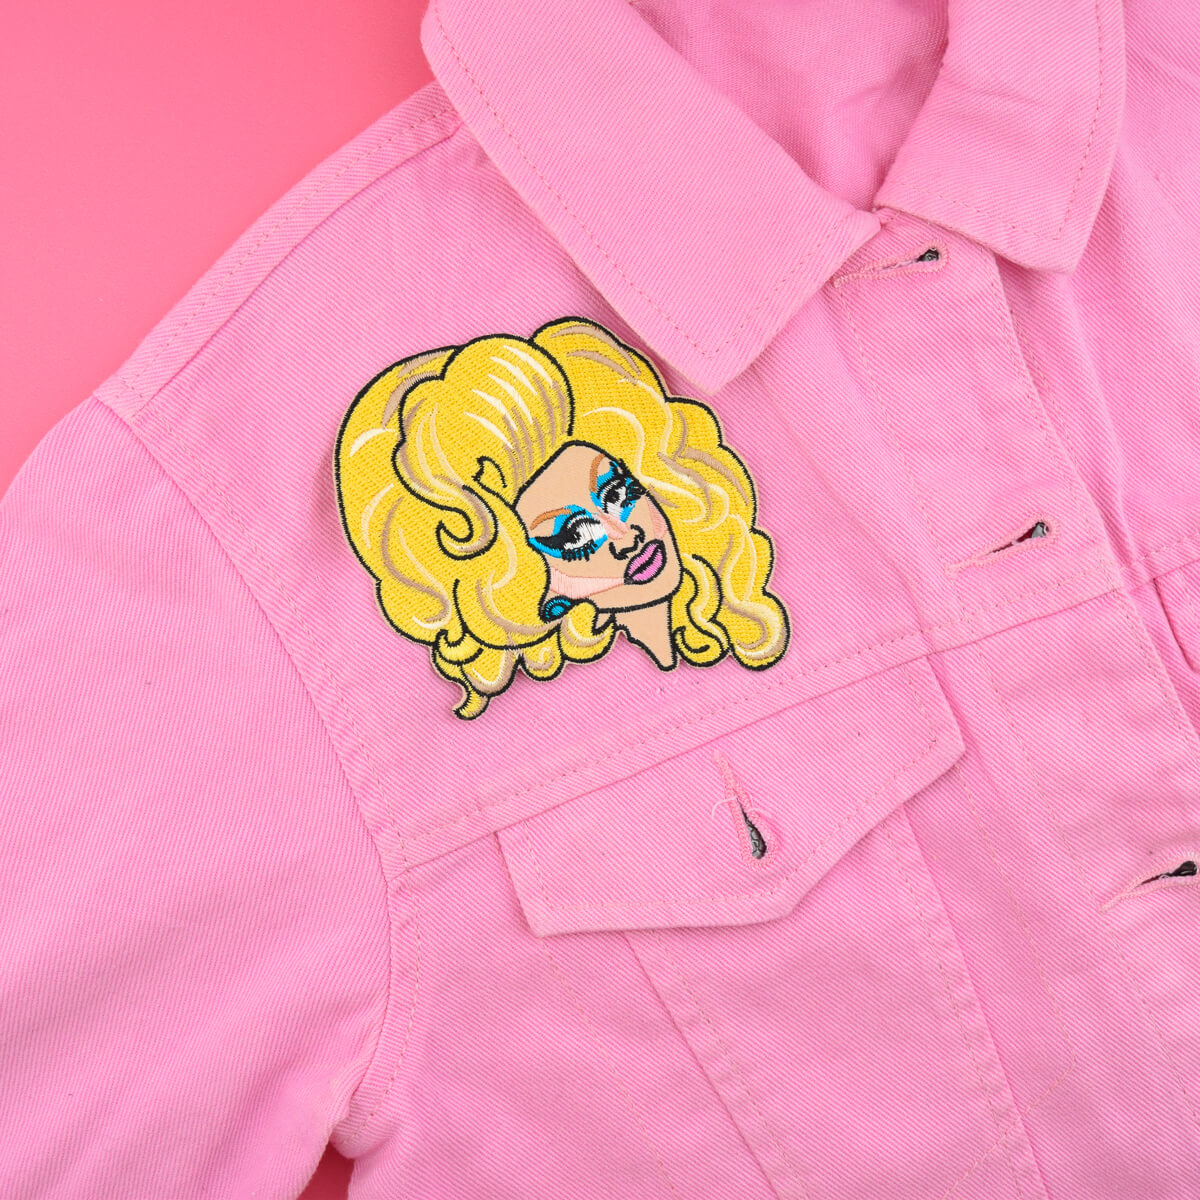 TRIXIE MATTEL PATCH - PACK OF 6